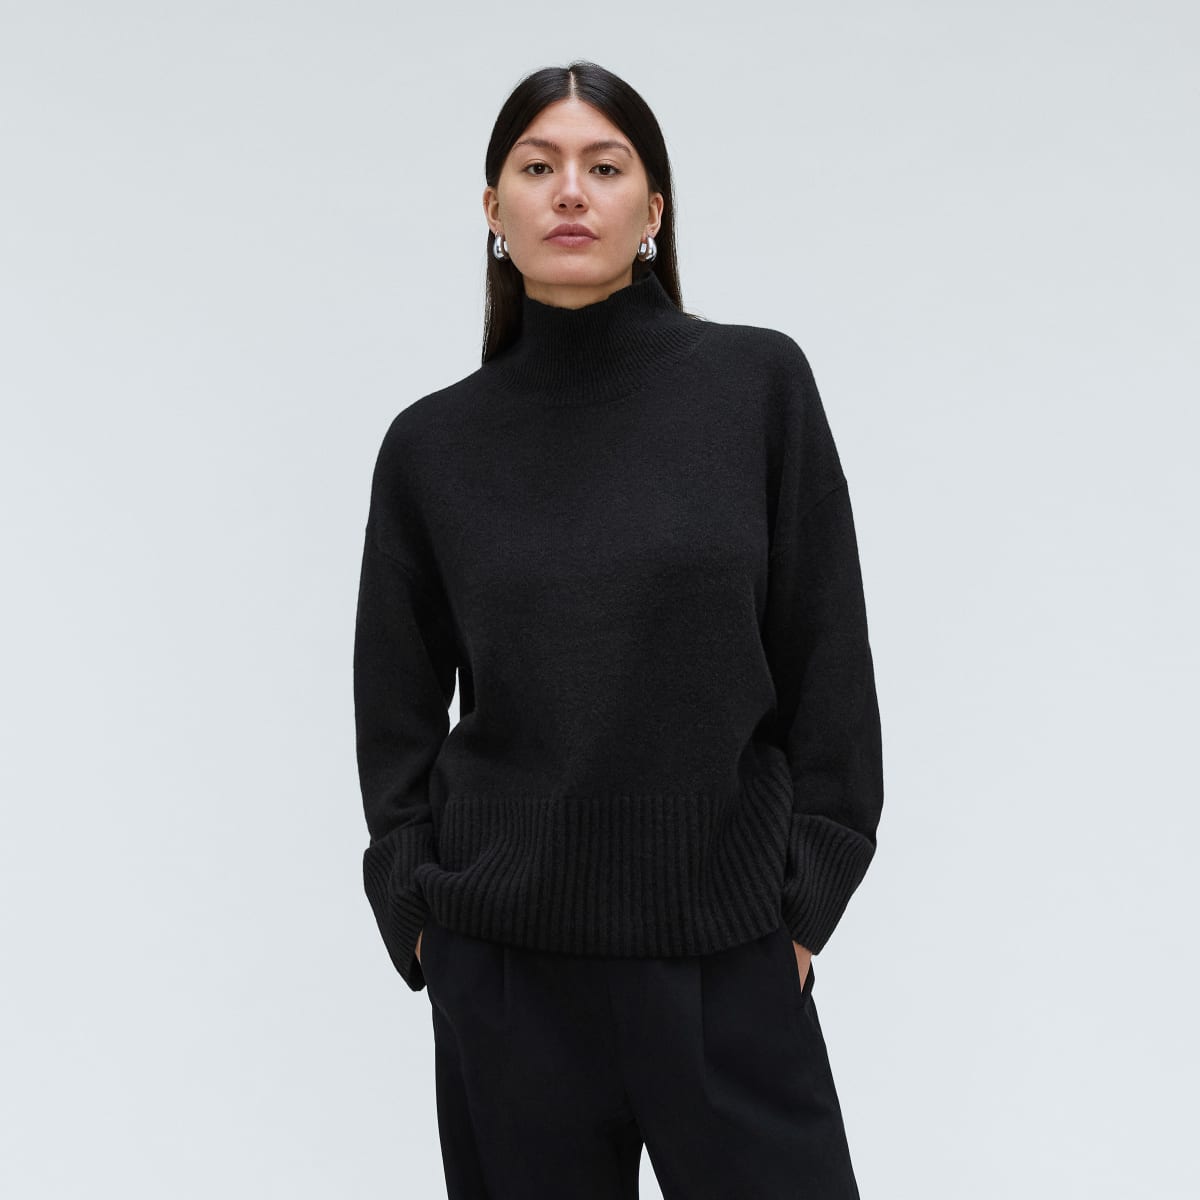 Shop these 10 versatile pieces from Everlane's capsule collection ...